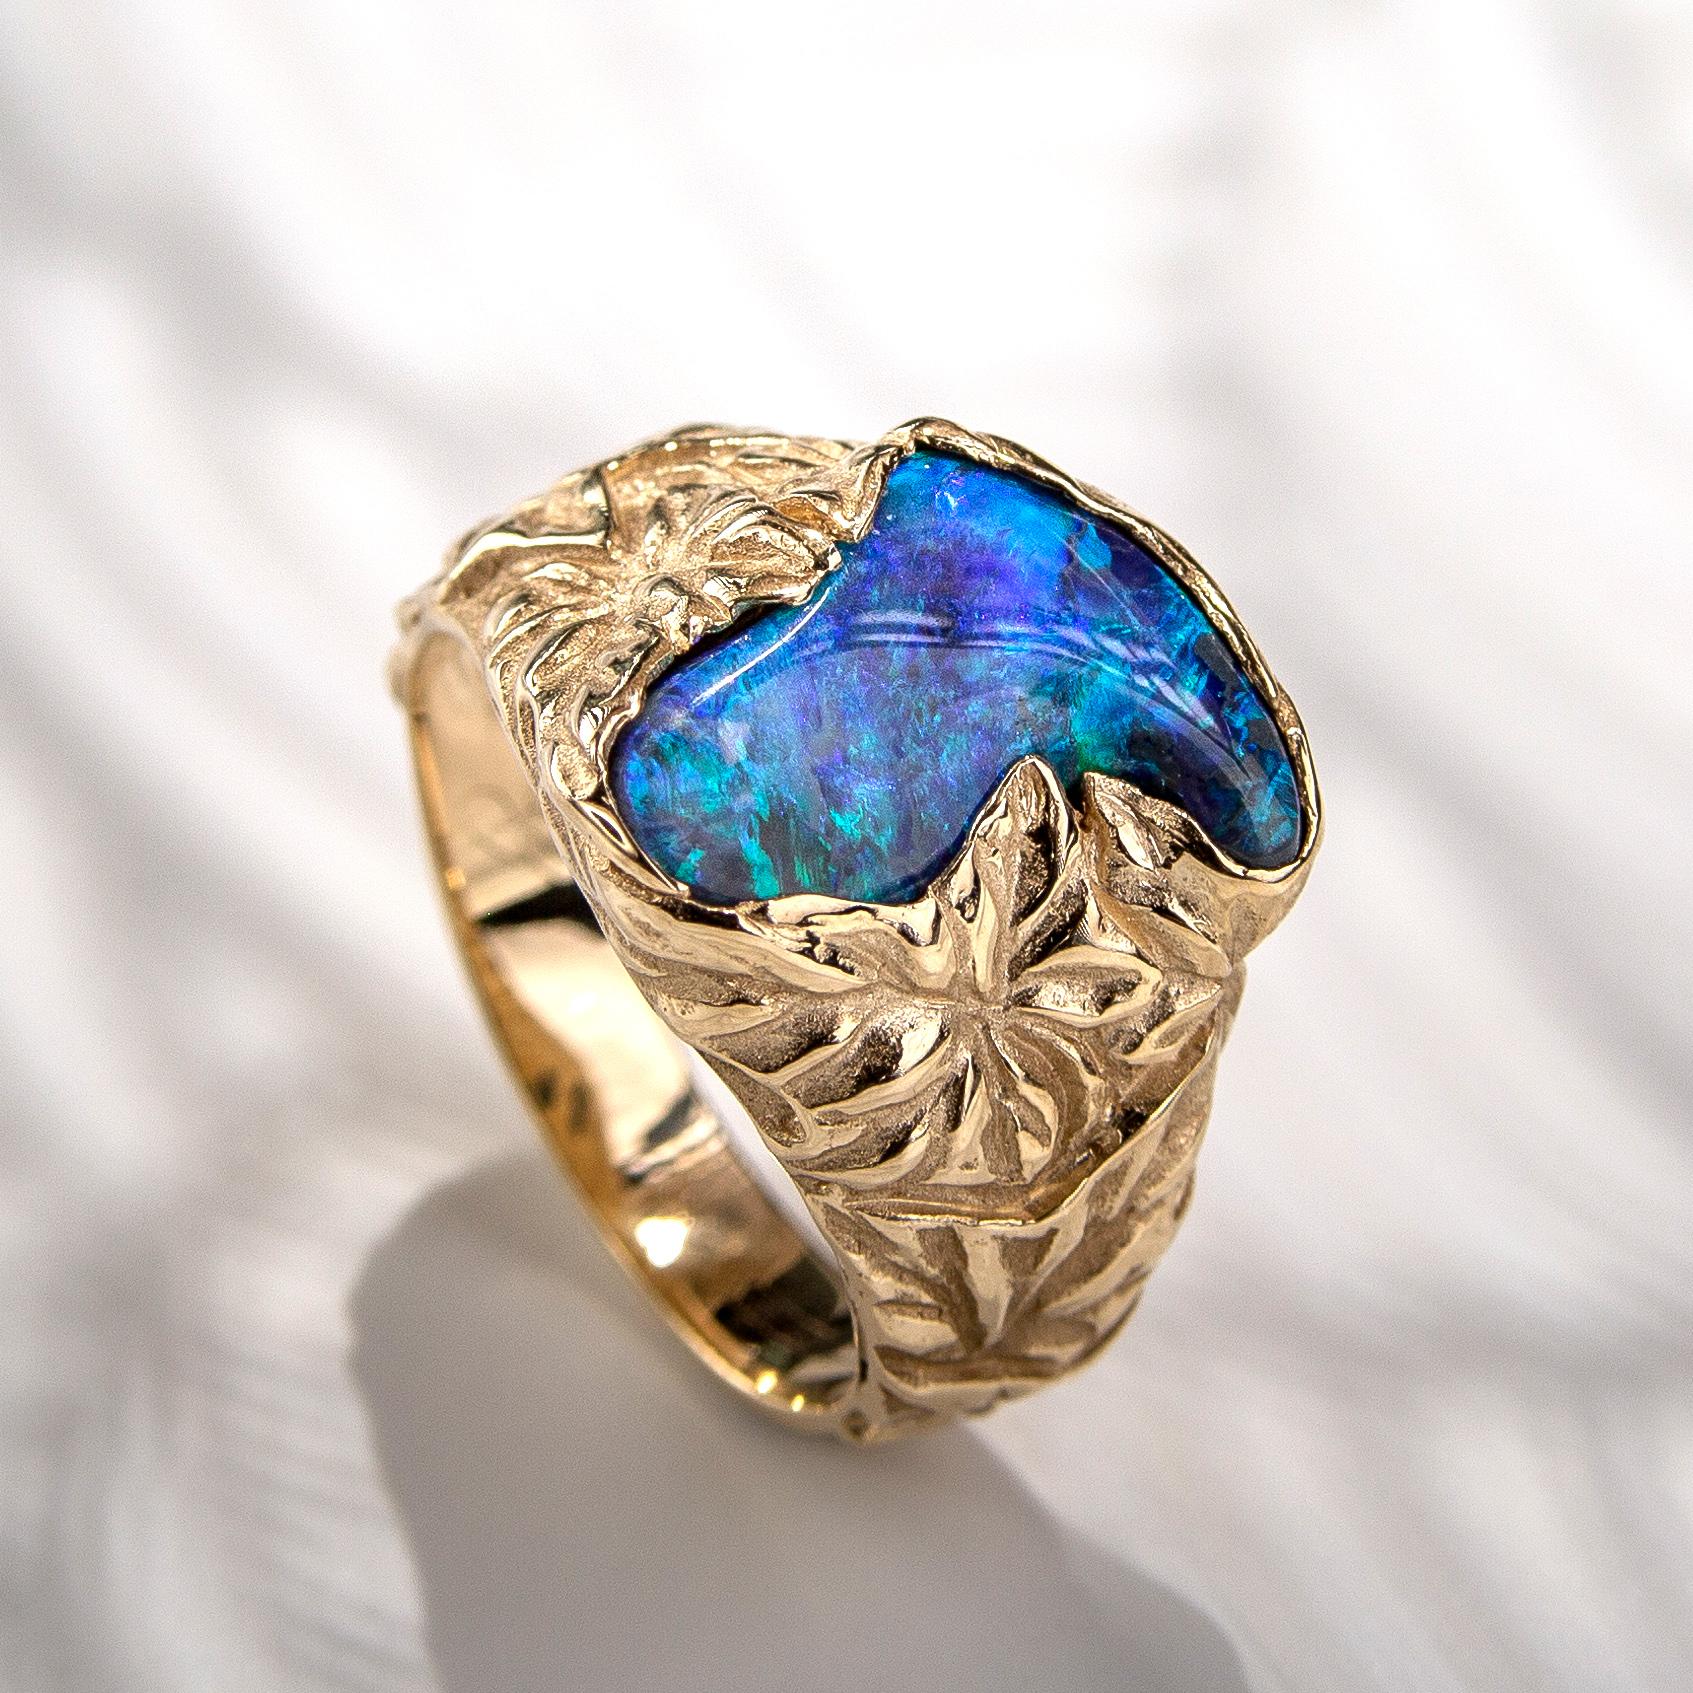 14K yellow gold ring with natural Black Opal 
opal origin - Australia 
opal measurements - 0.079 х 0.43 х 0.55  in / 2 х 11 х 14 mm
opal weight - 2.32 carats
ring size - 7 US
ring weight - 6.43 grams


We ship our jewelry worldwide – for our